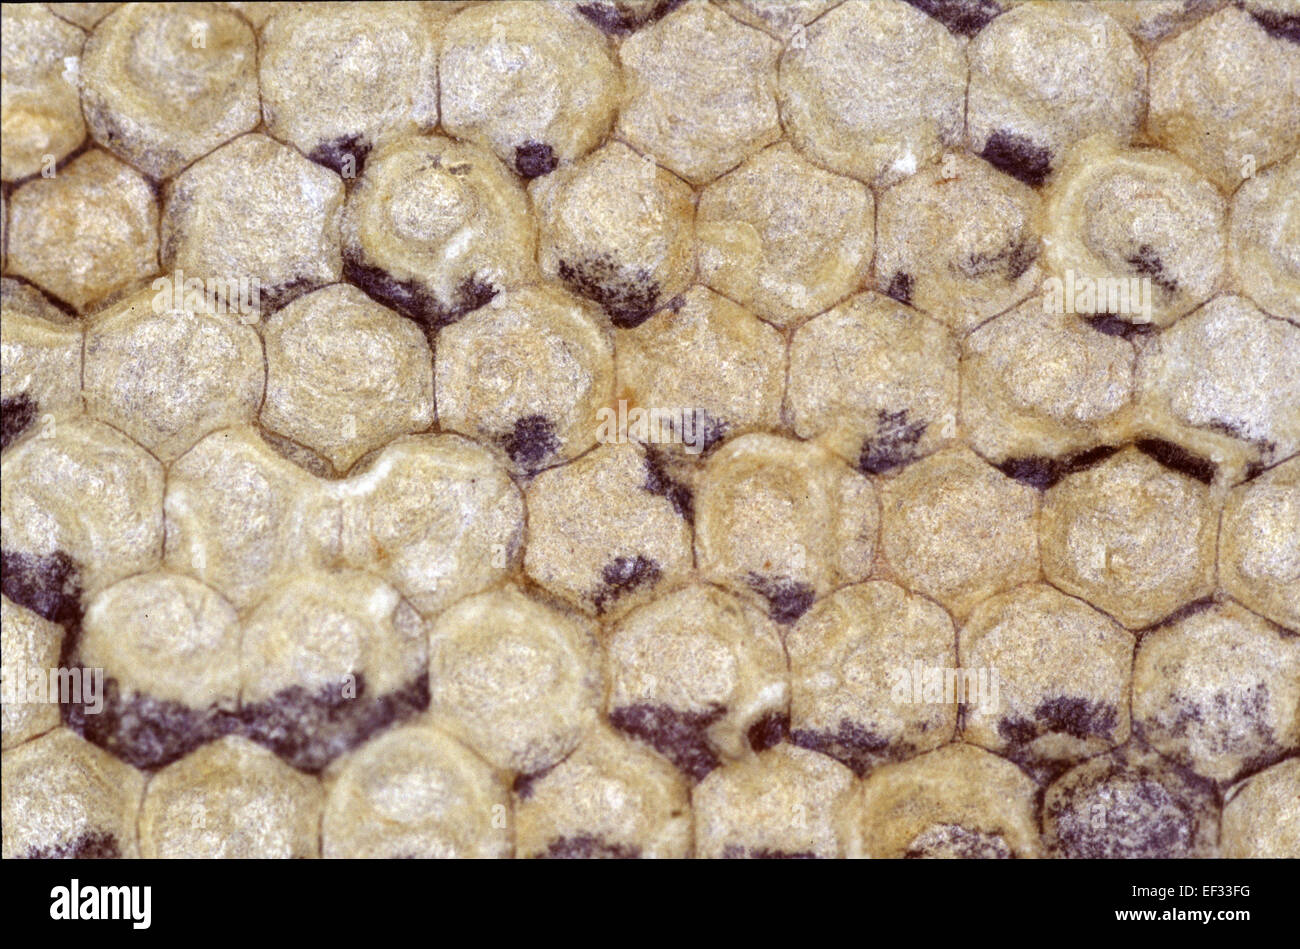 A capped honeycomb. Capped honey combs are an indication that the honey is ripe and can be harvested. Photo: Klaus Nowottnick Date: June 16, 2012 Stock Photo